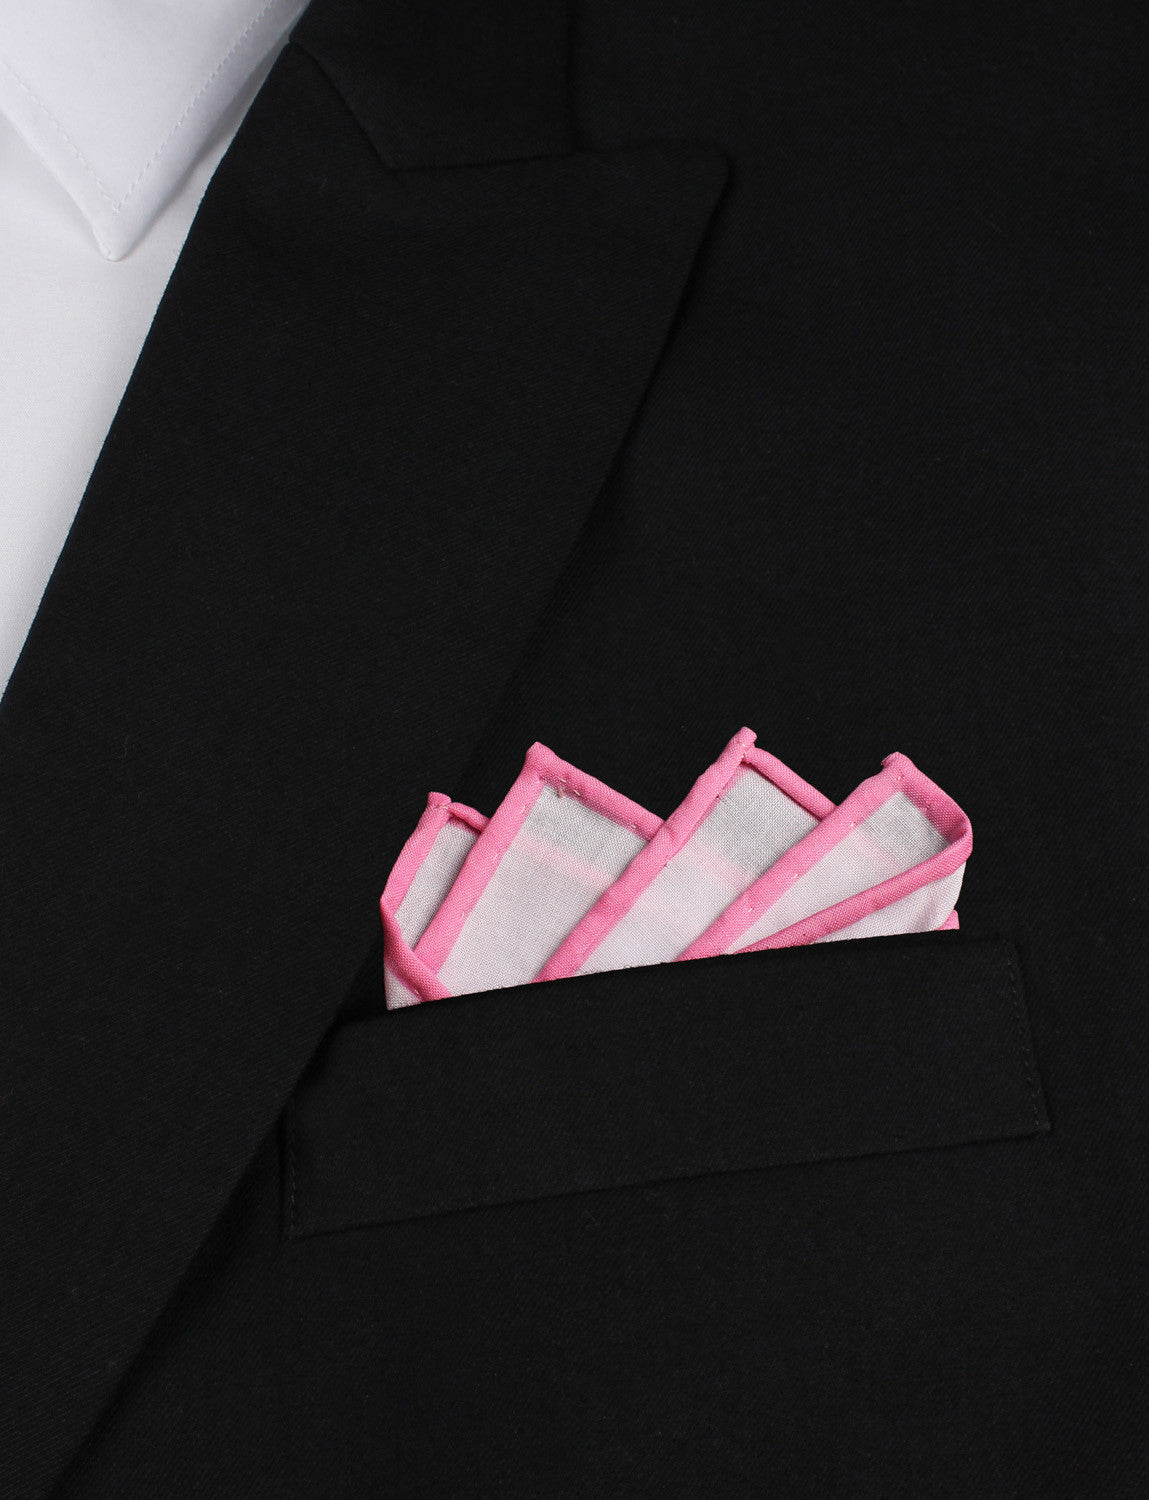 White Cotton Pocket Square with Pink Border  Point Fold